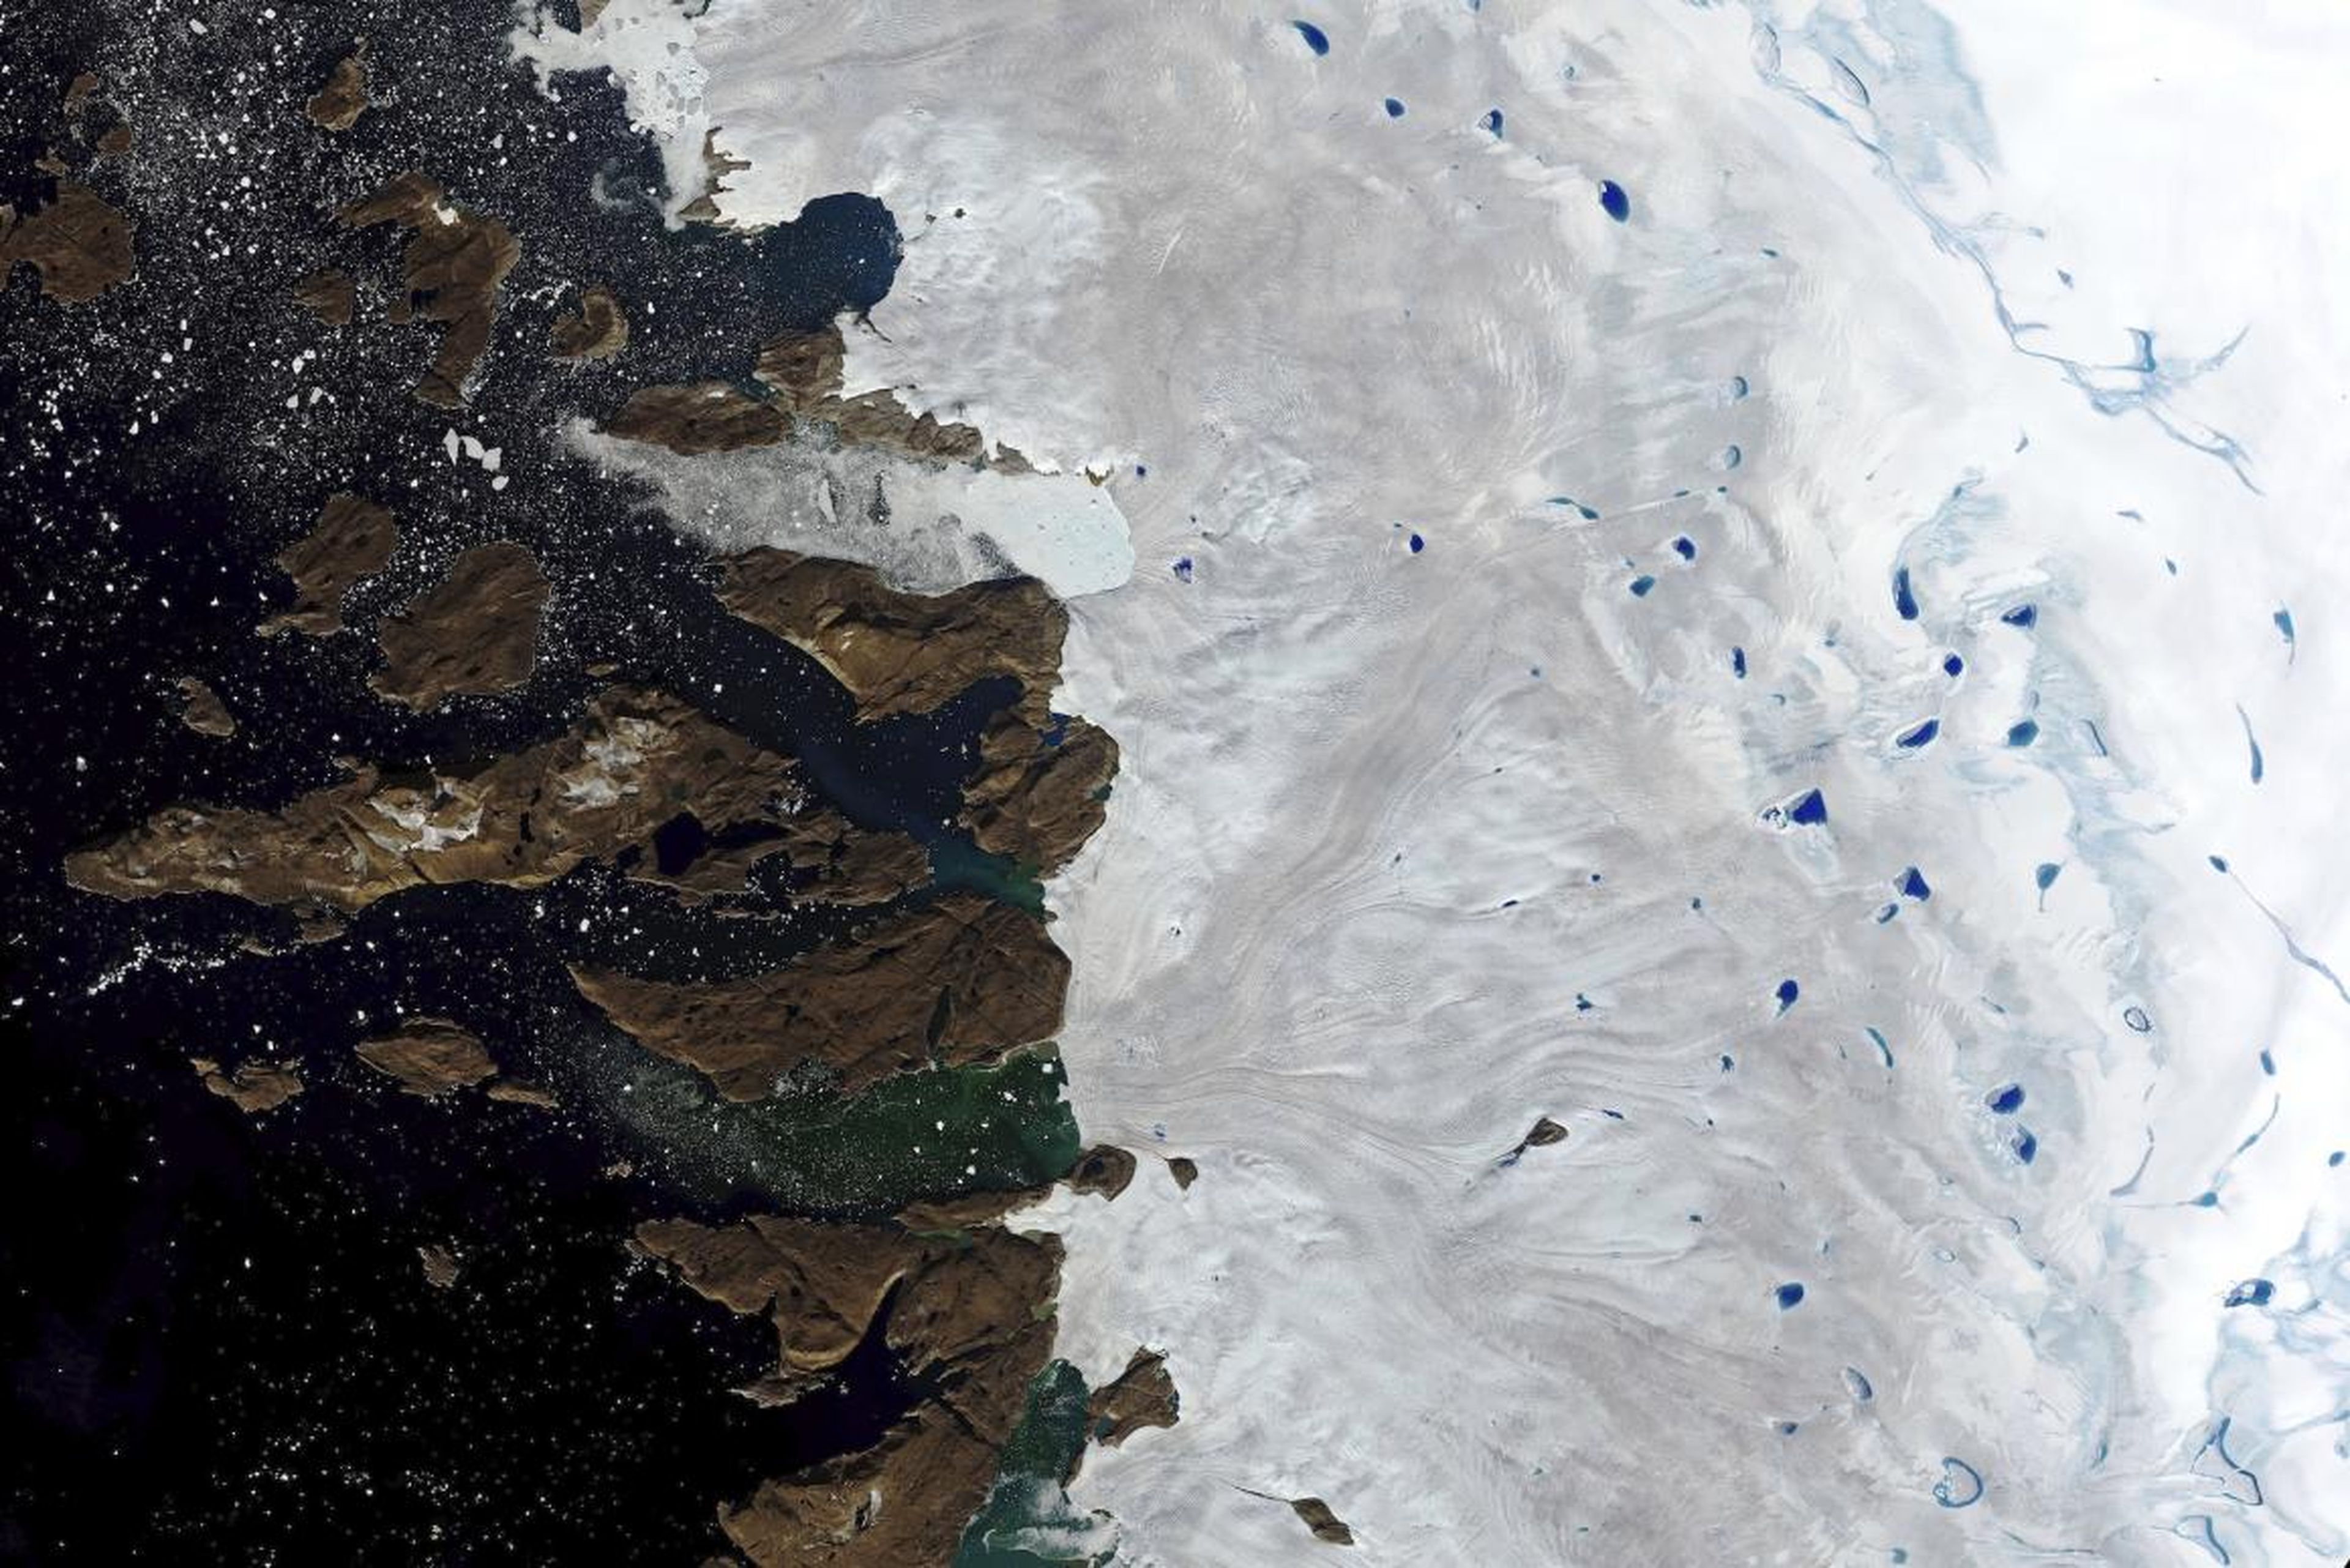 A satellite image shows melt-water ponding on the surface of the ice sheet in northwest Greenland, near the sheet’s edge, on July 30, 2019.